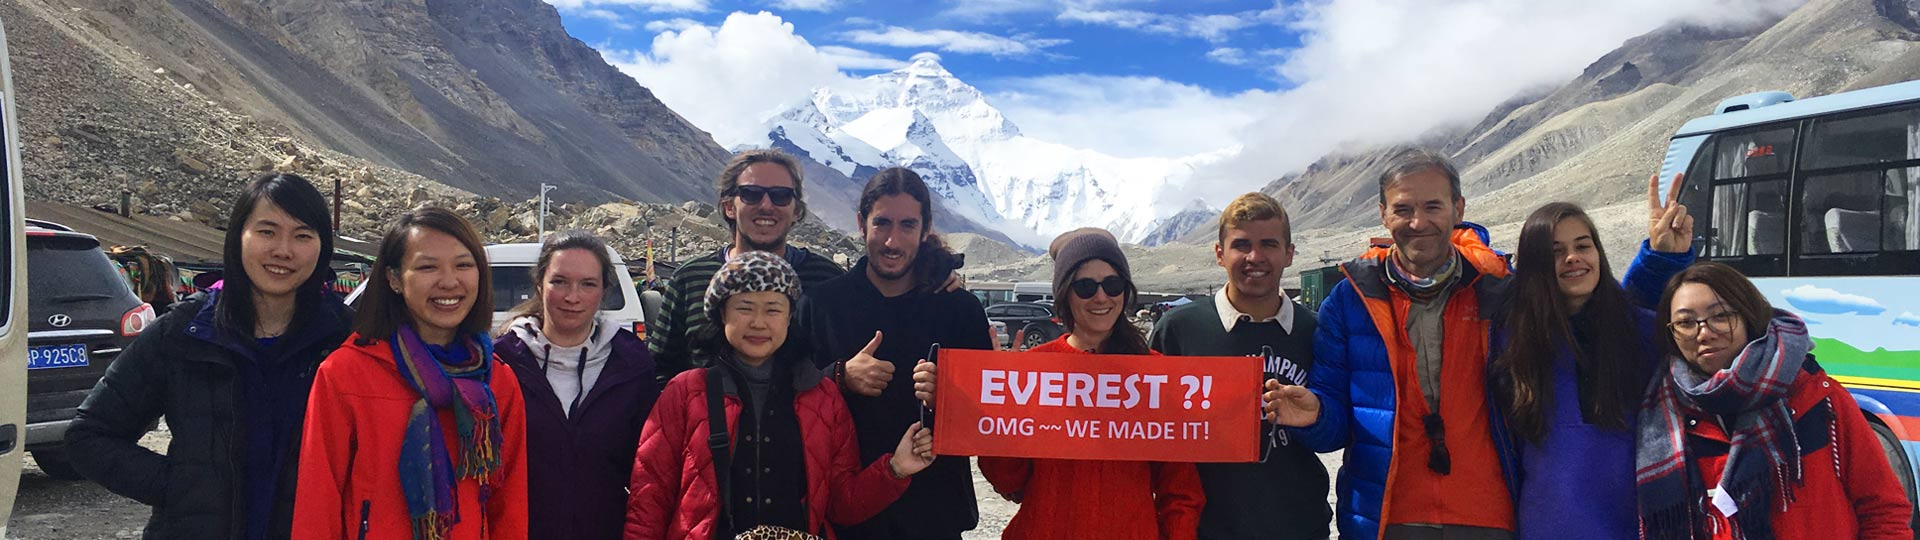 Everest Base Camp Tour Guide